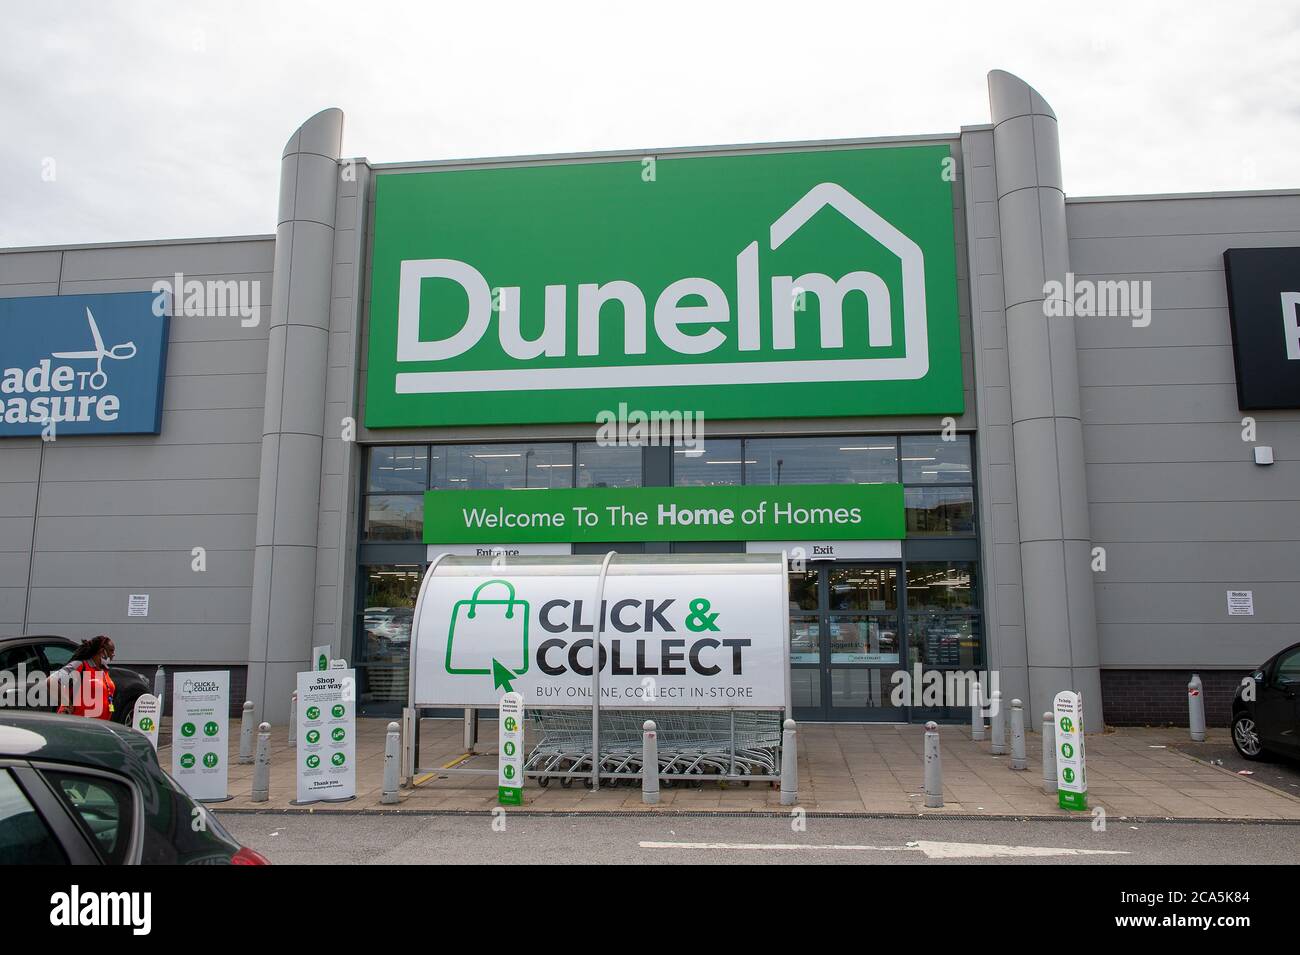 Slough, Berkshire, UK. 4th August, 2020. Online sales at the high street home store Dunelm rose extensively during the Coronavirus lockdown. Credit: Maureen McLean/Alamy Stock Photo